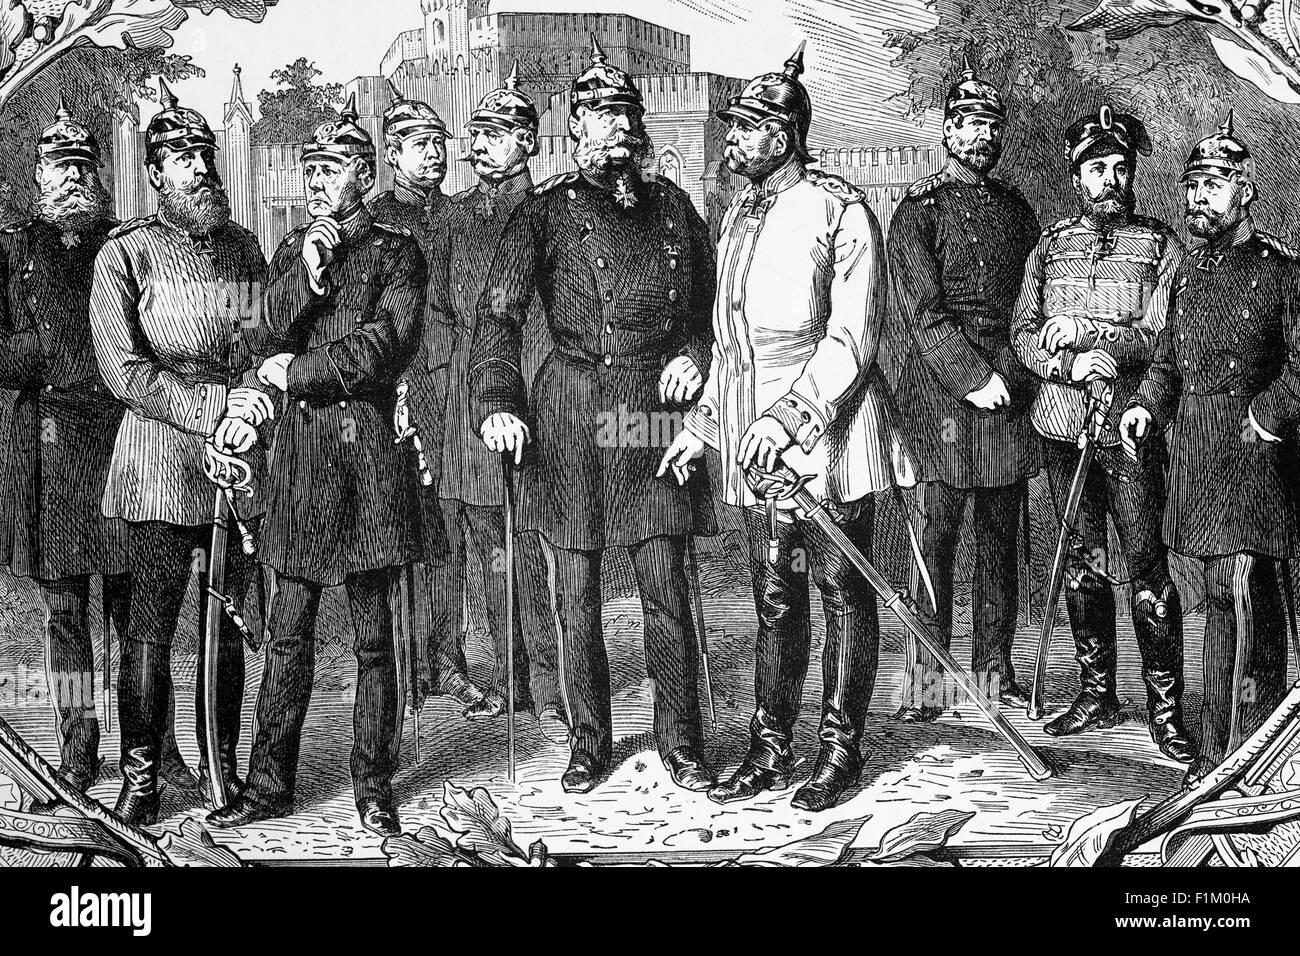 Emperor William I, (1797-1888), King of Prussia and first German Emperor with his military advisers. It was under the leadership of William and his Chancellor Otto von Bismarck, Prussia achieved the unification of Germany and the establishment of the German Empire. Stock Photo